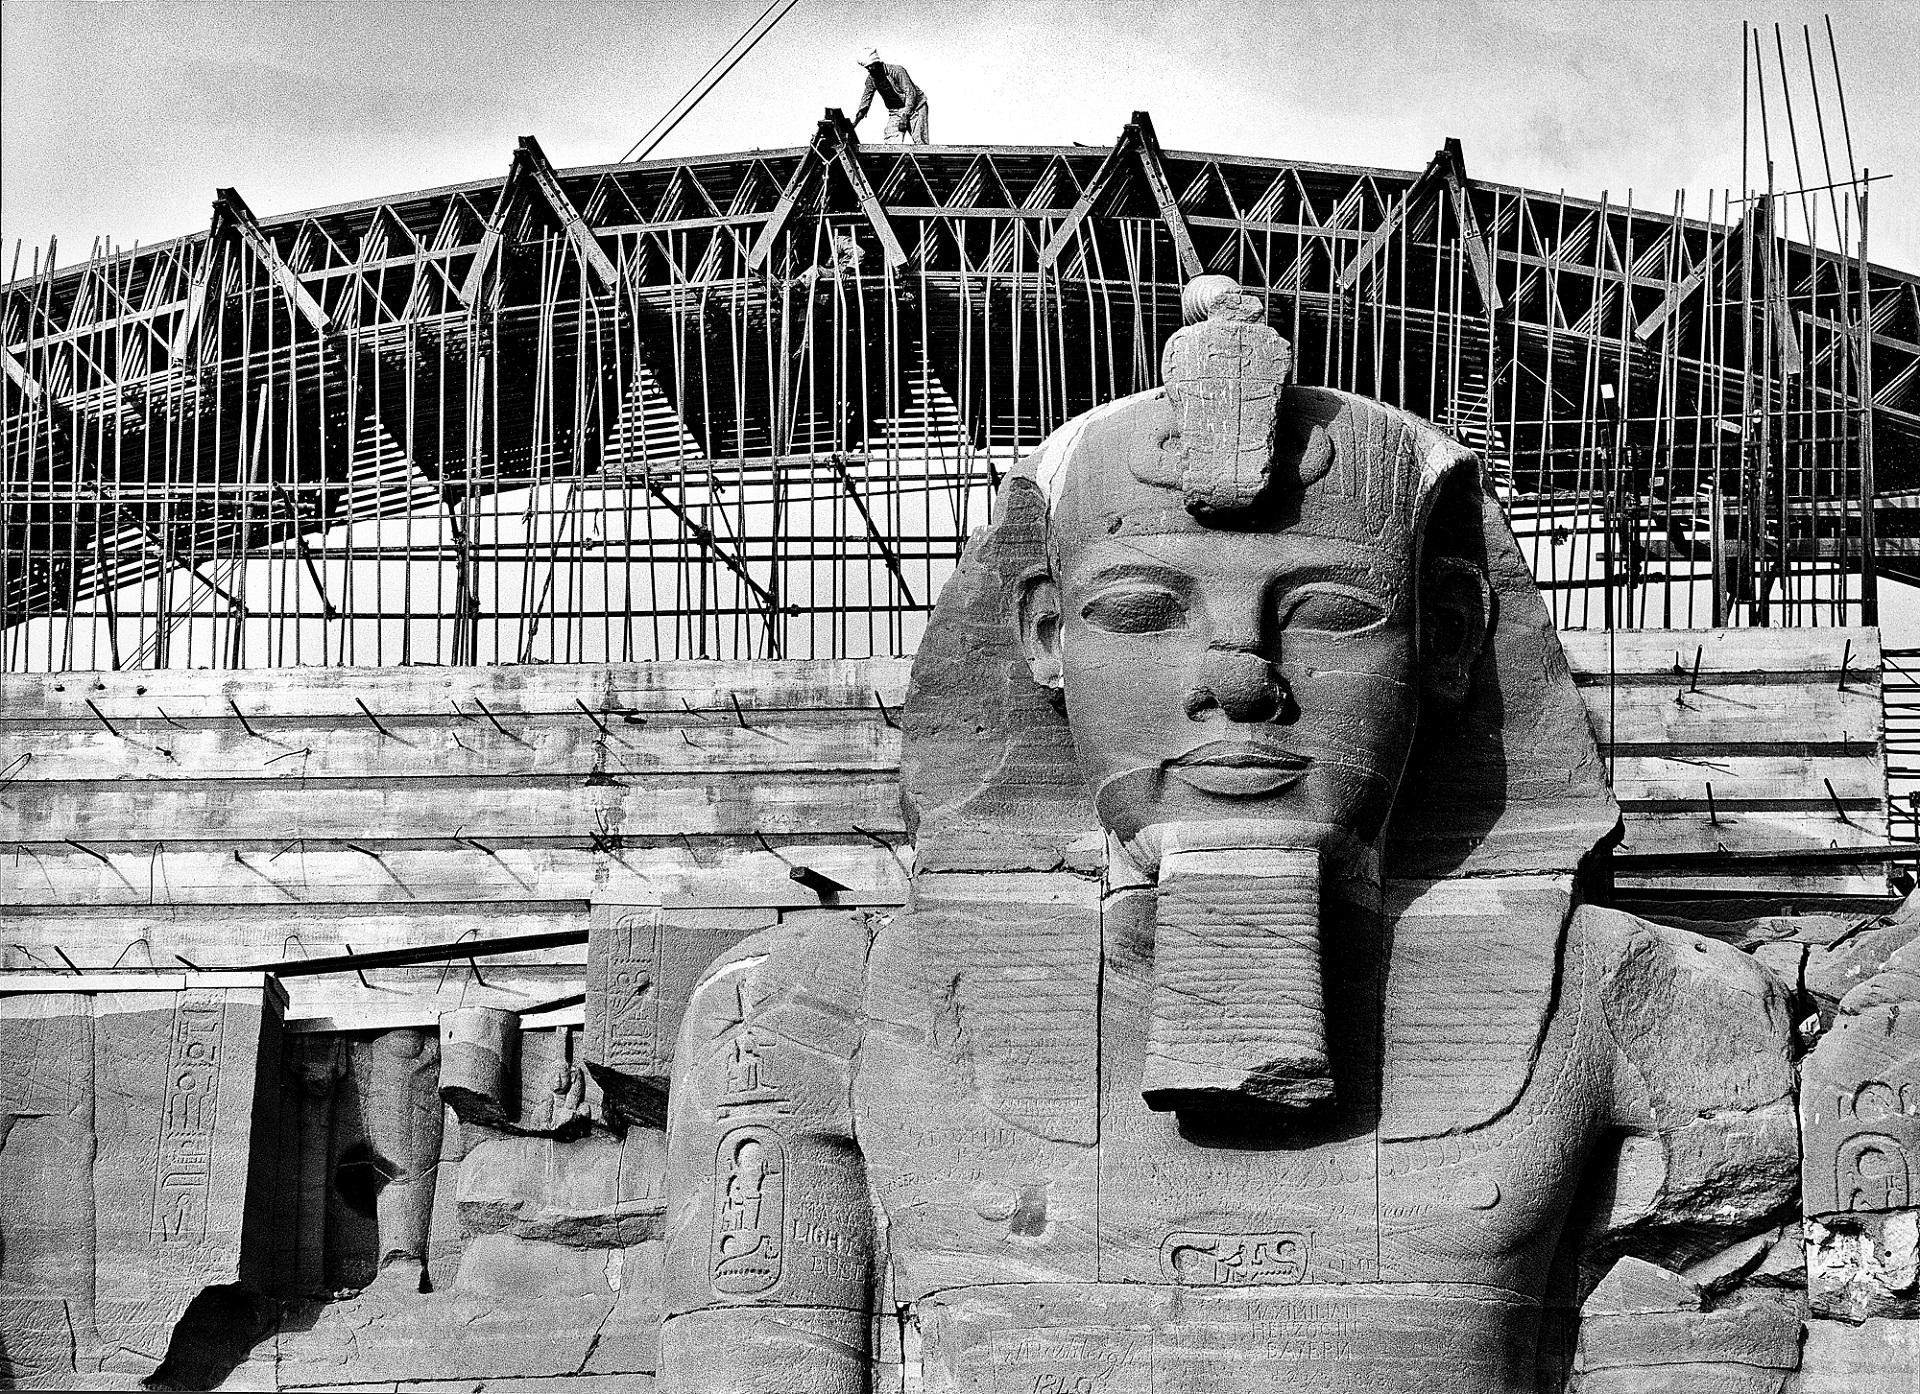 The Salvage of the Temples of Abu Simbel